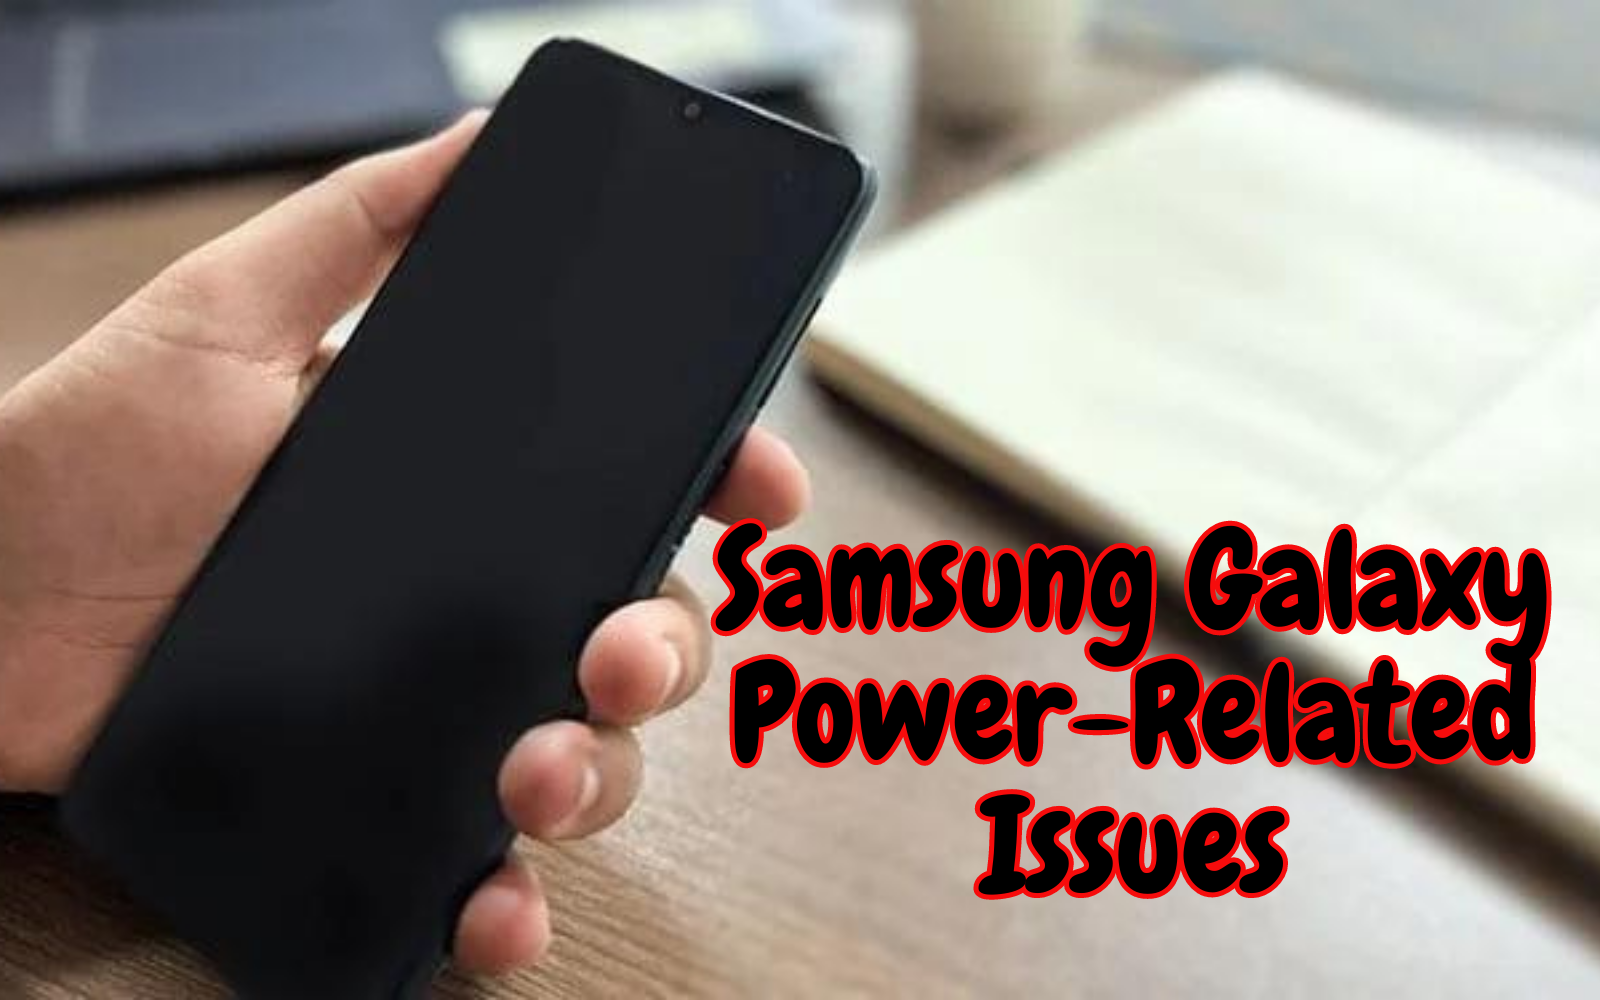 Samsung Galaxy Power-Related Issues